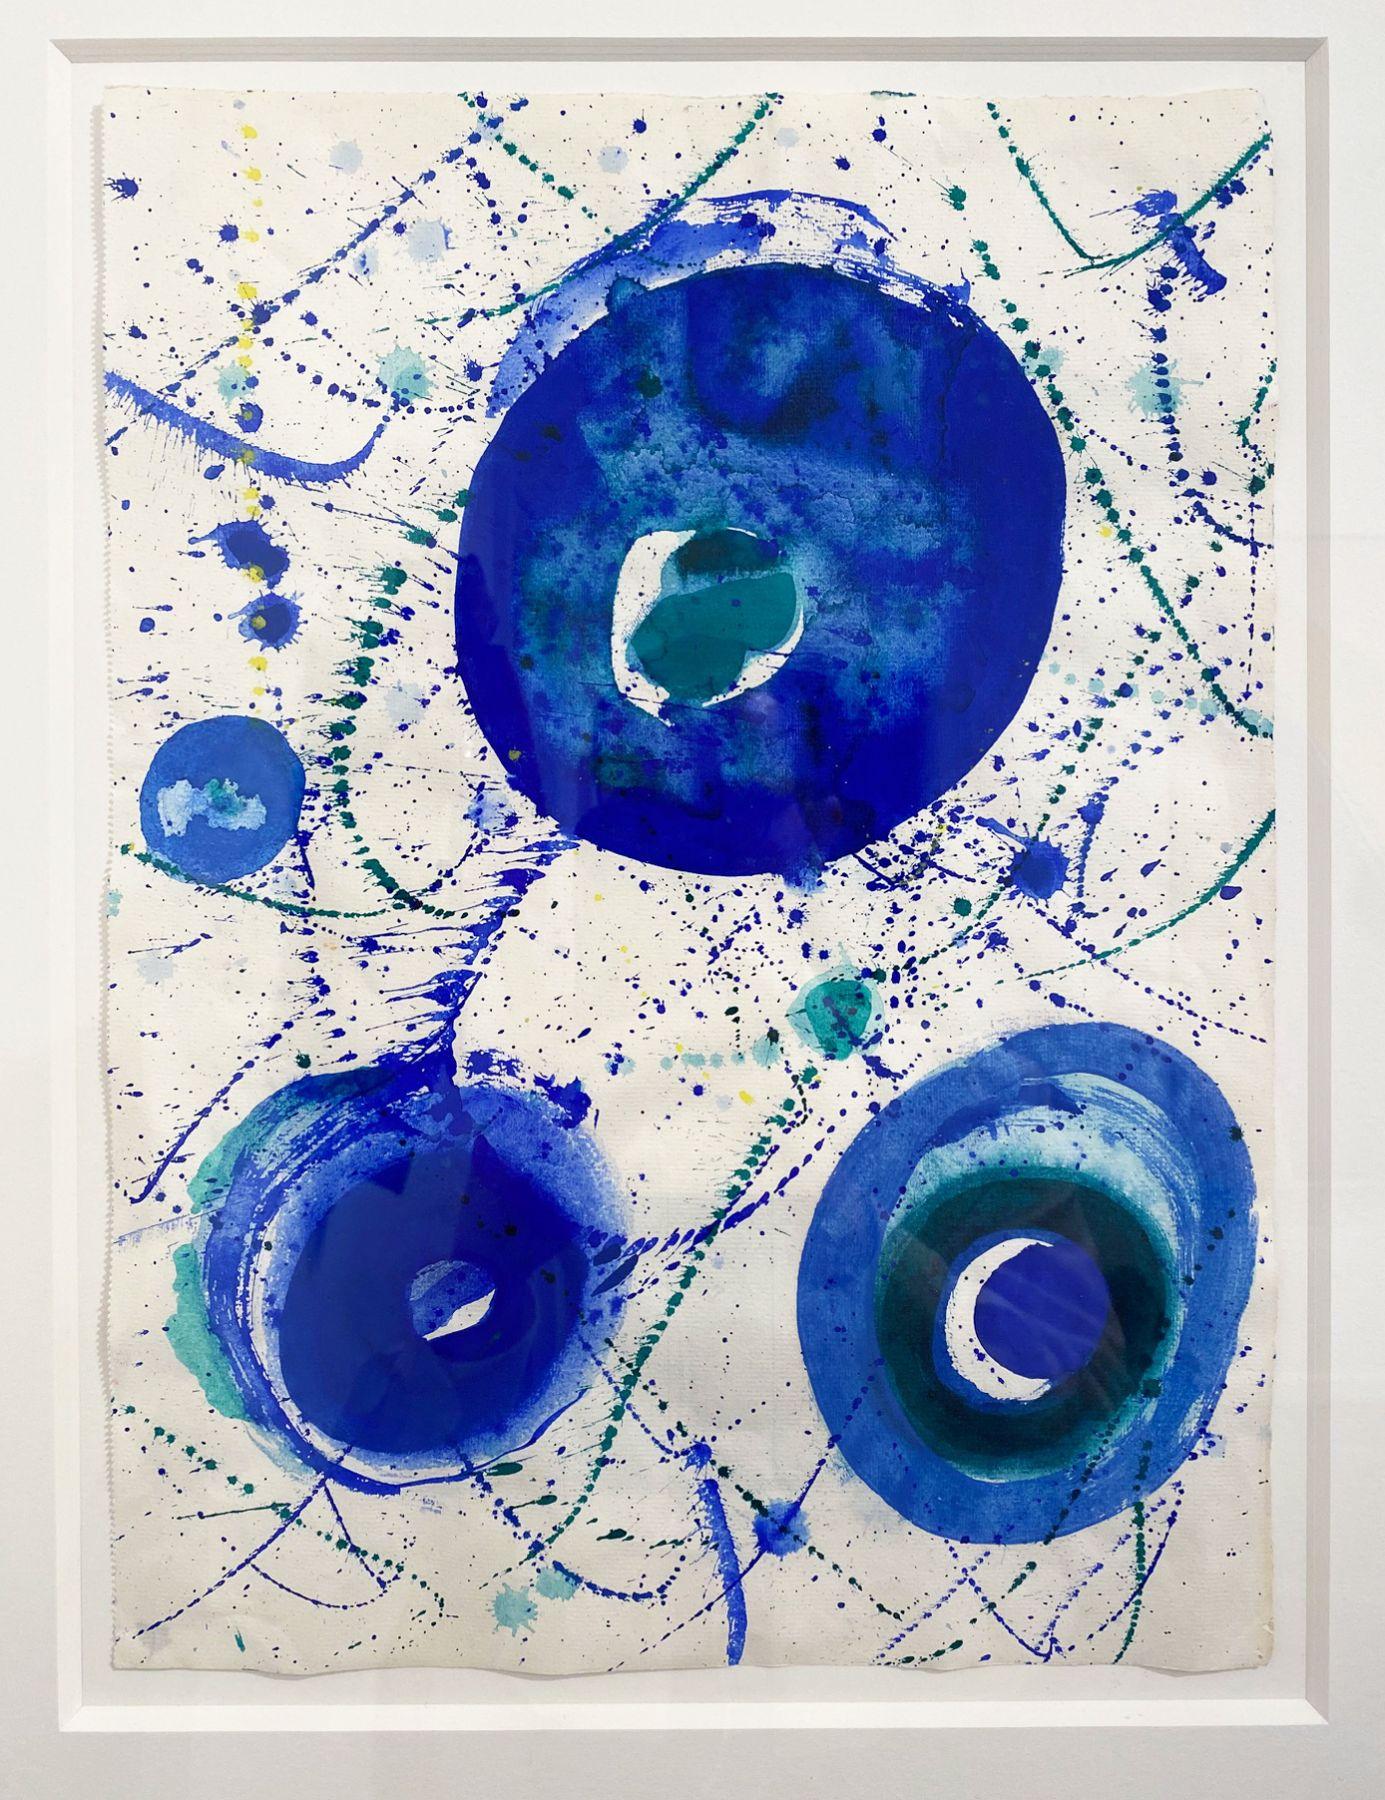 Sam Francis Abstract Painting - Untitled (Blue Ball)